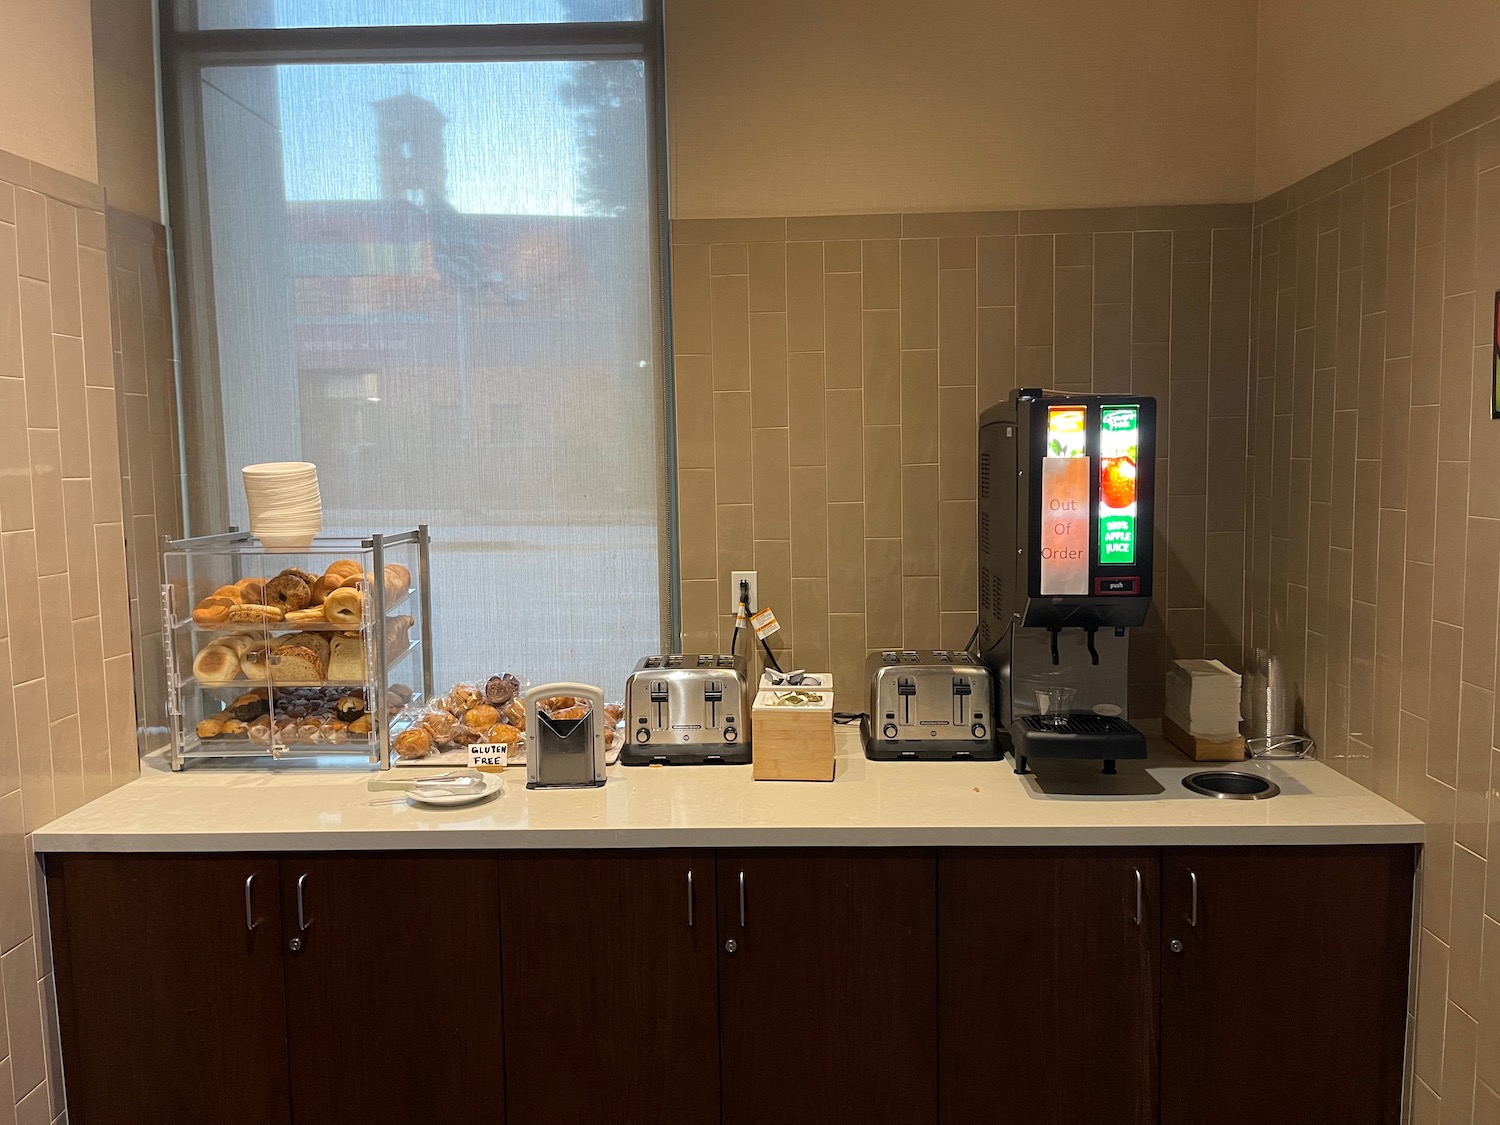 a coffee machine and bread on a counter